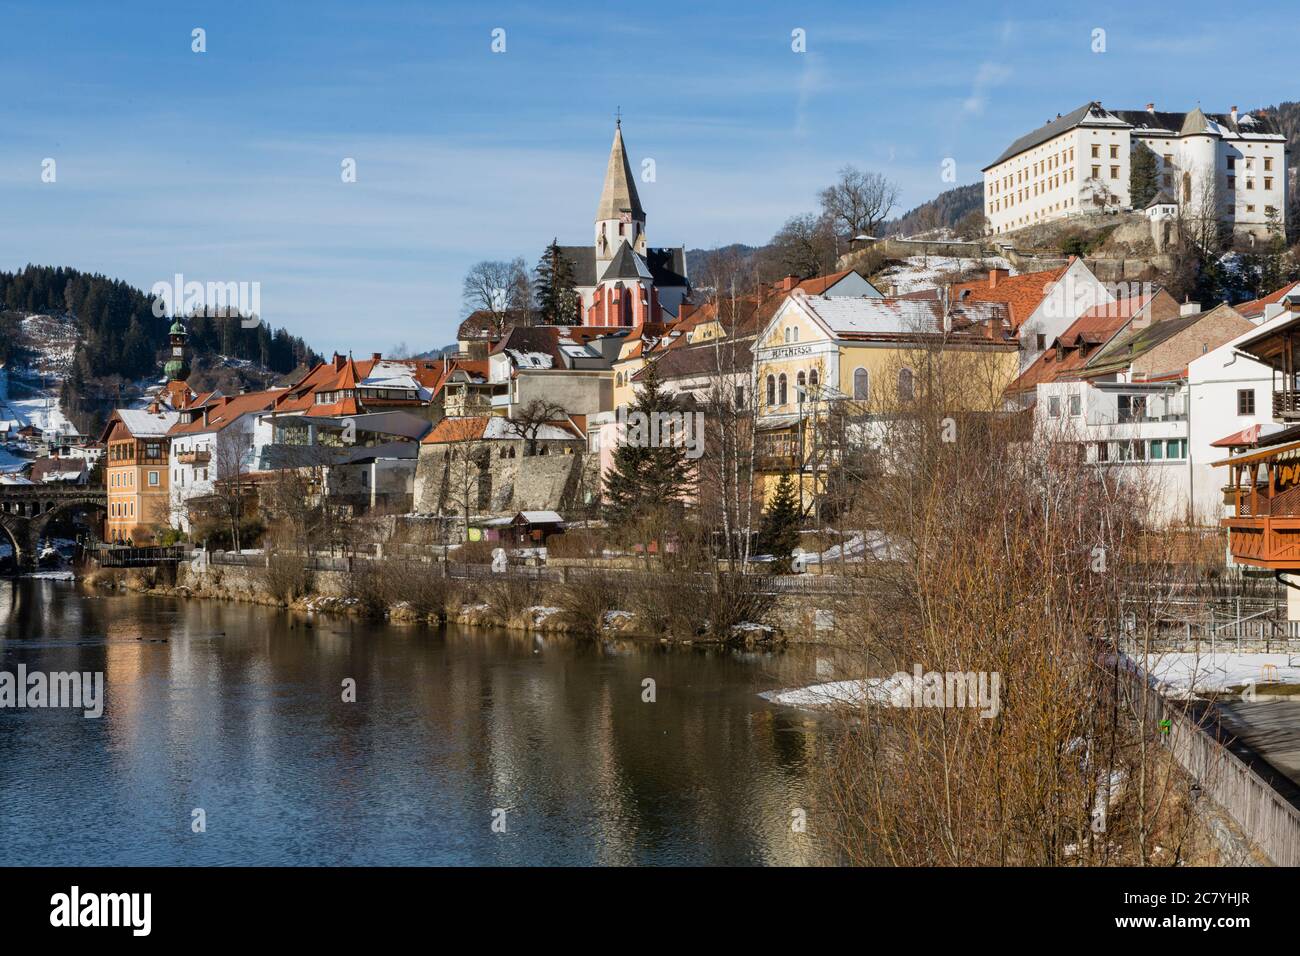 View of the town of Murau in Styria (Austria) with the Mur river in the foreground Stock Photo